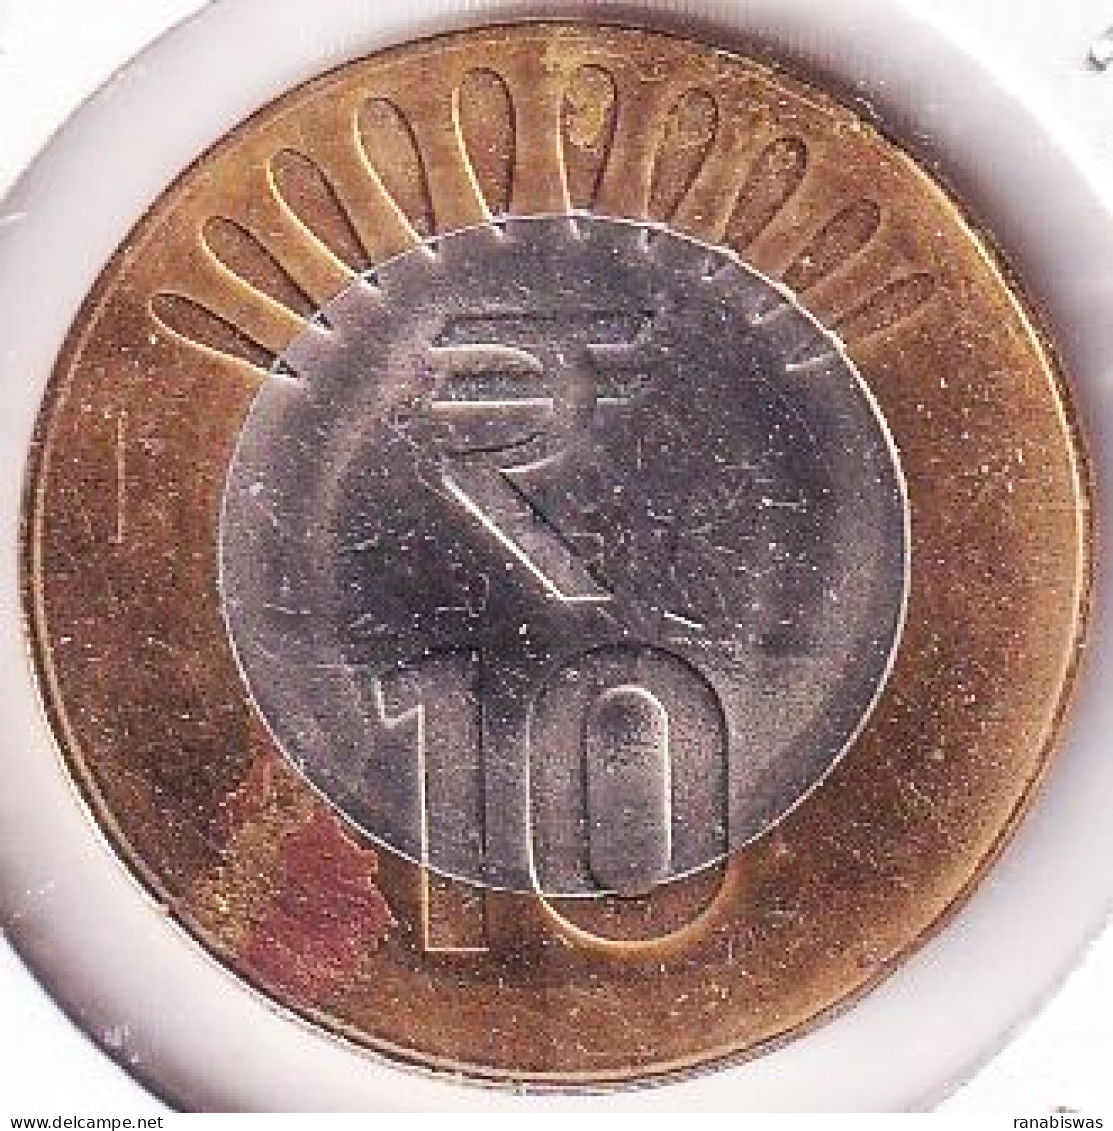 INDIA COIN LOT 449, 10 RUPEES 2017, CALCUTTA MINT, XF, IMPRESSION SHIFTED ERROR - Indien